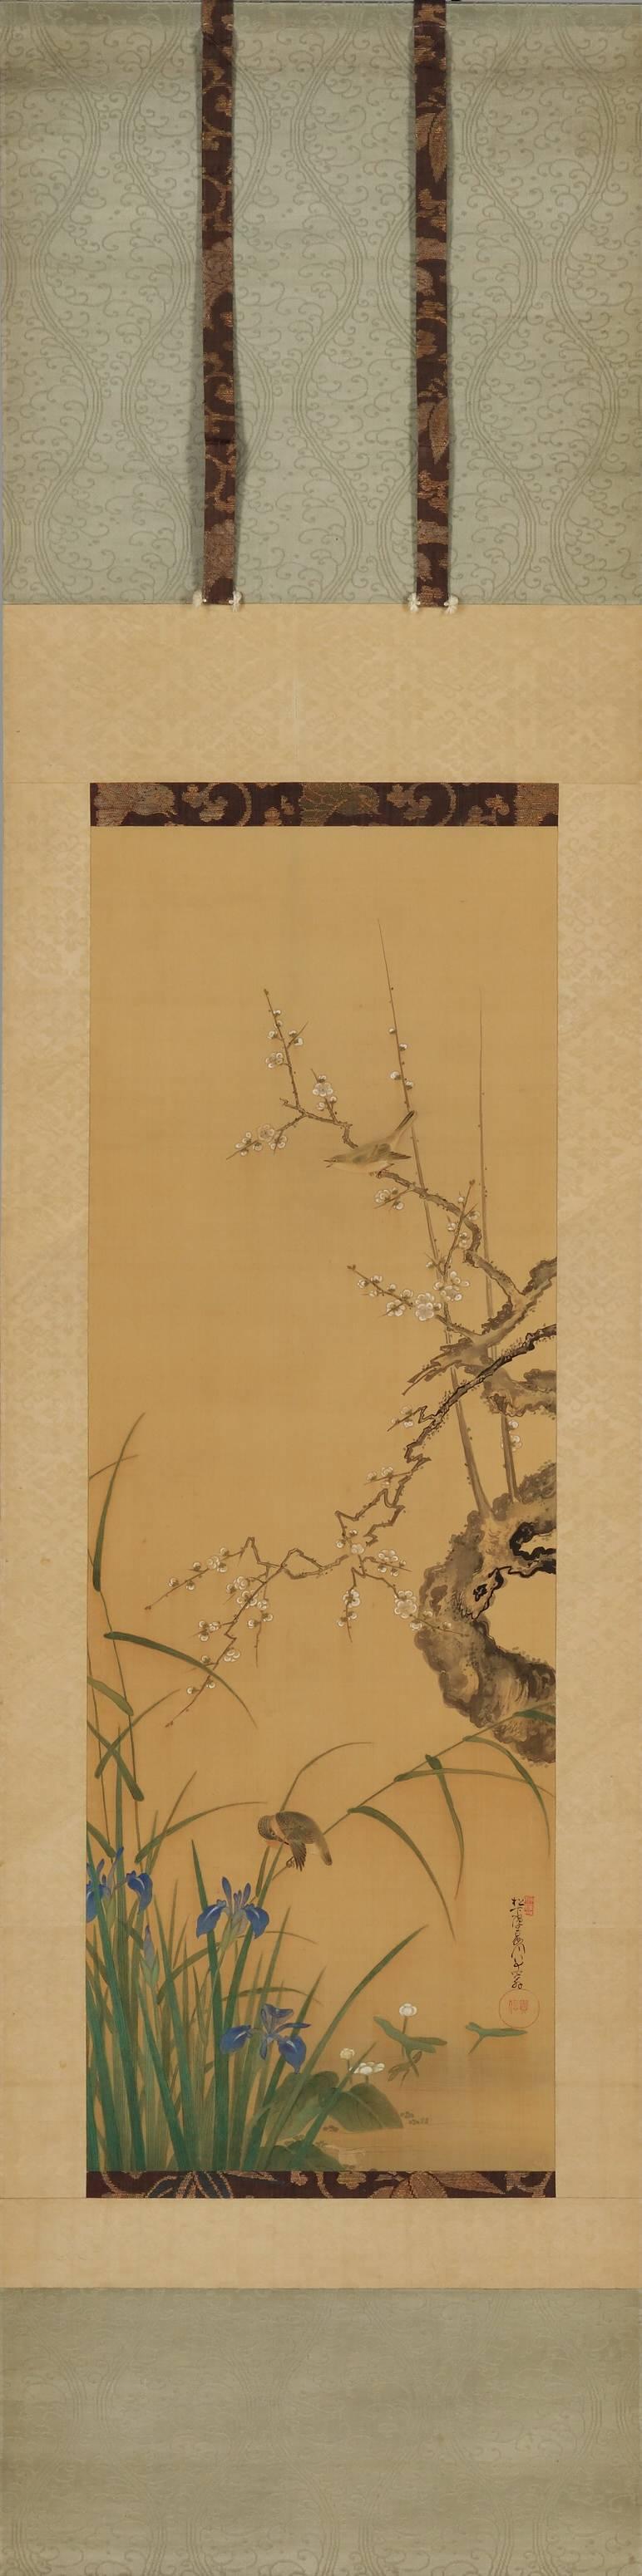 Kano Ansen Takanobu (1809-1892)

“Flowers and Birds of Spring and Summer” 1888

Hanging scroll, ink and color on silk

Inscription: “Matsushita……..Ansen 80 years of age”
Upper seal: Kano Shi
Lower seal: Takanobu

A sophisticated painting